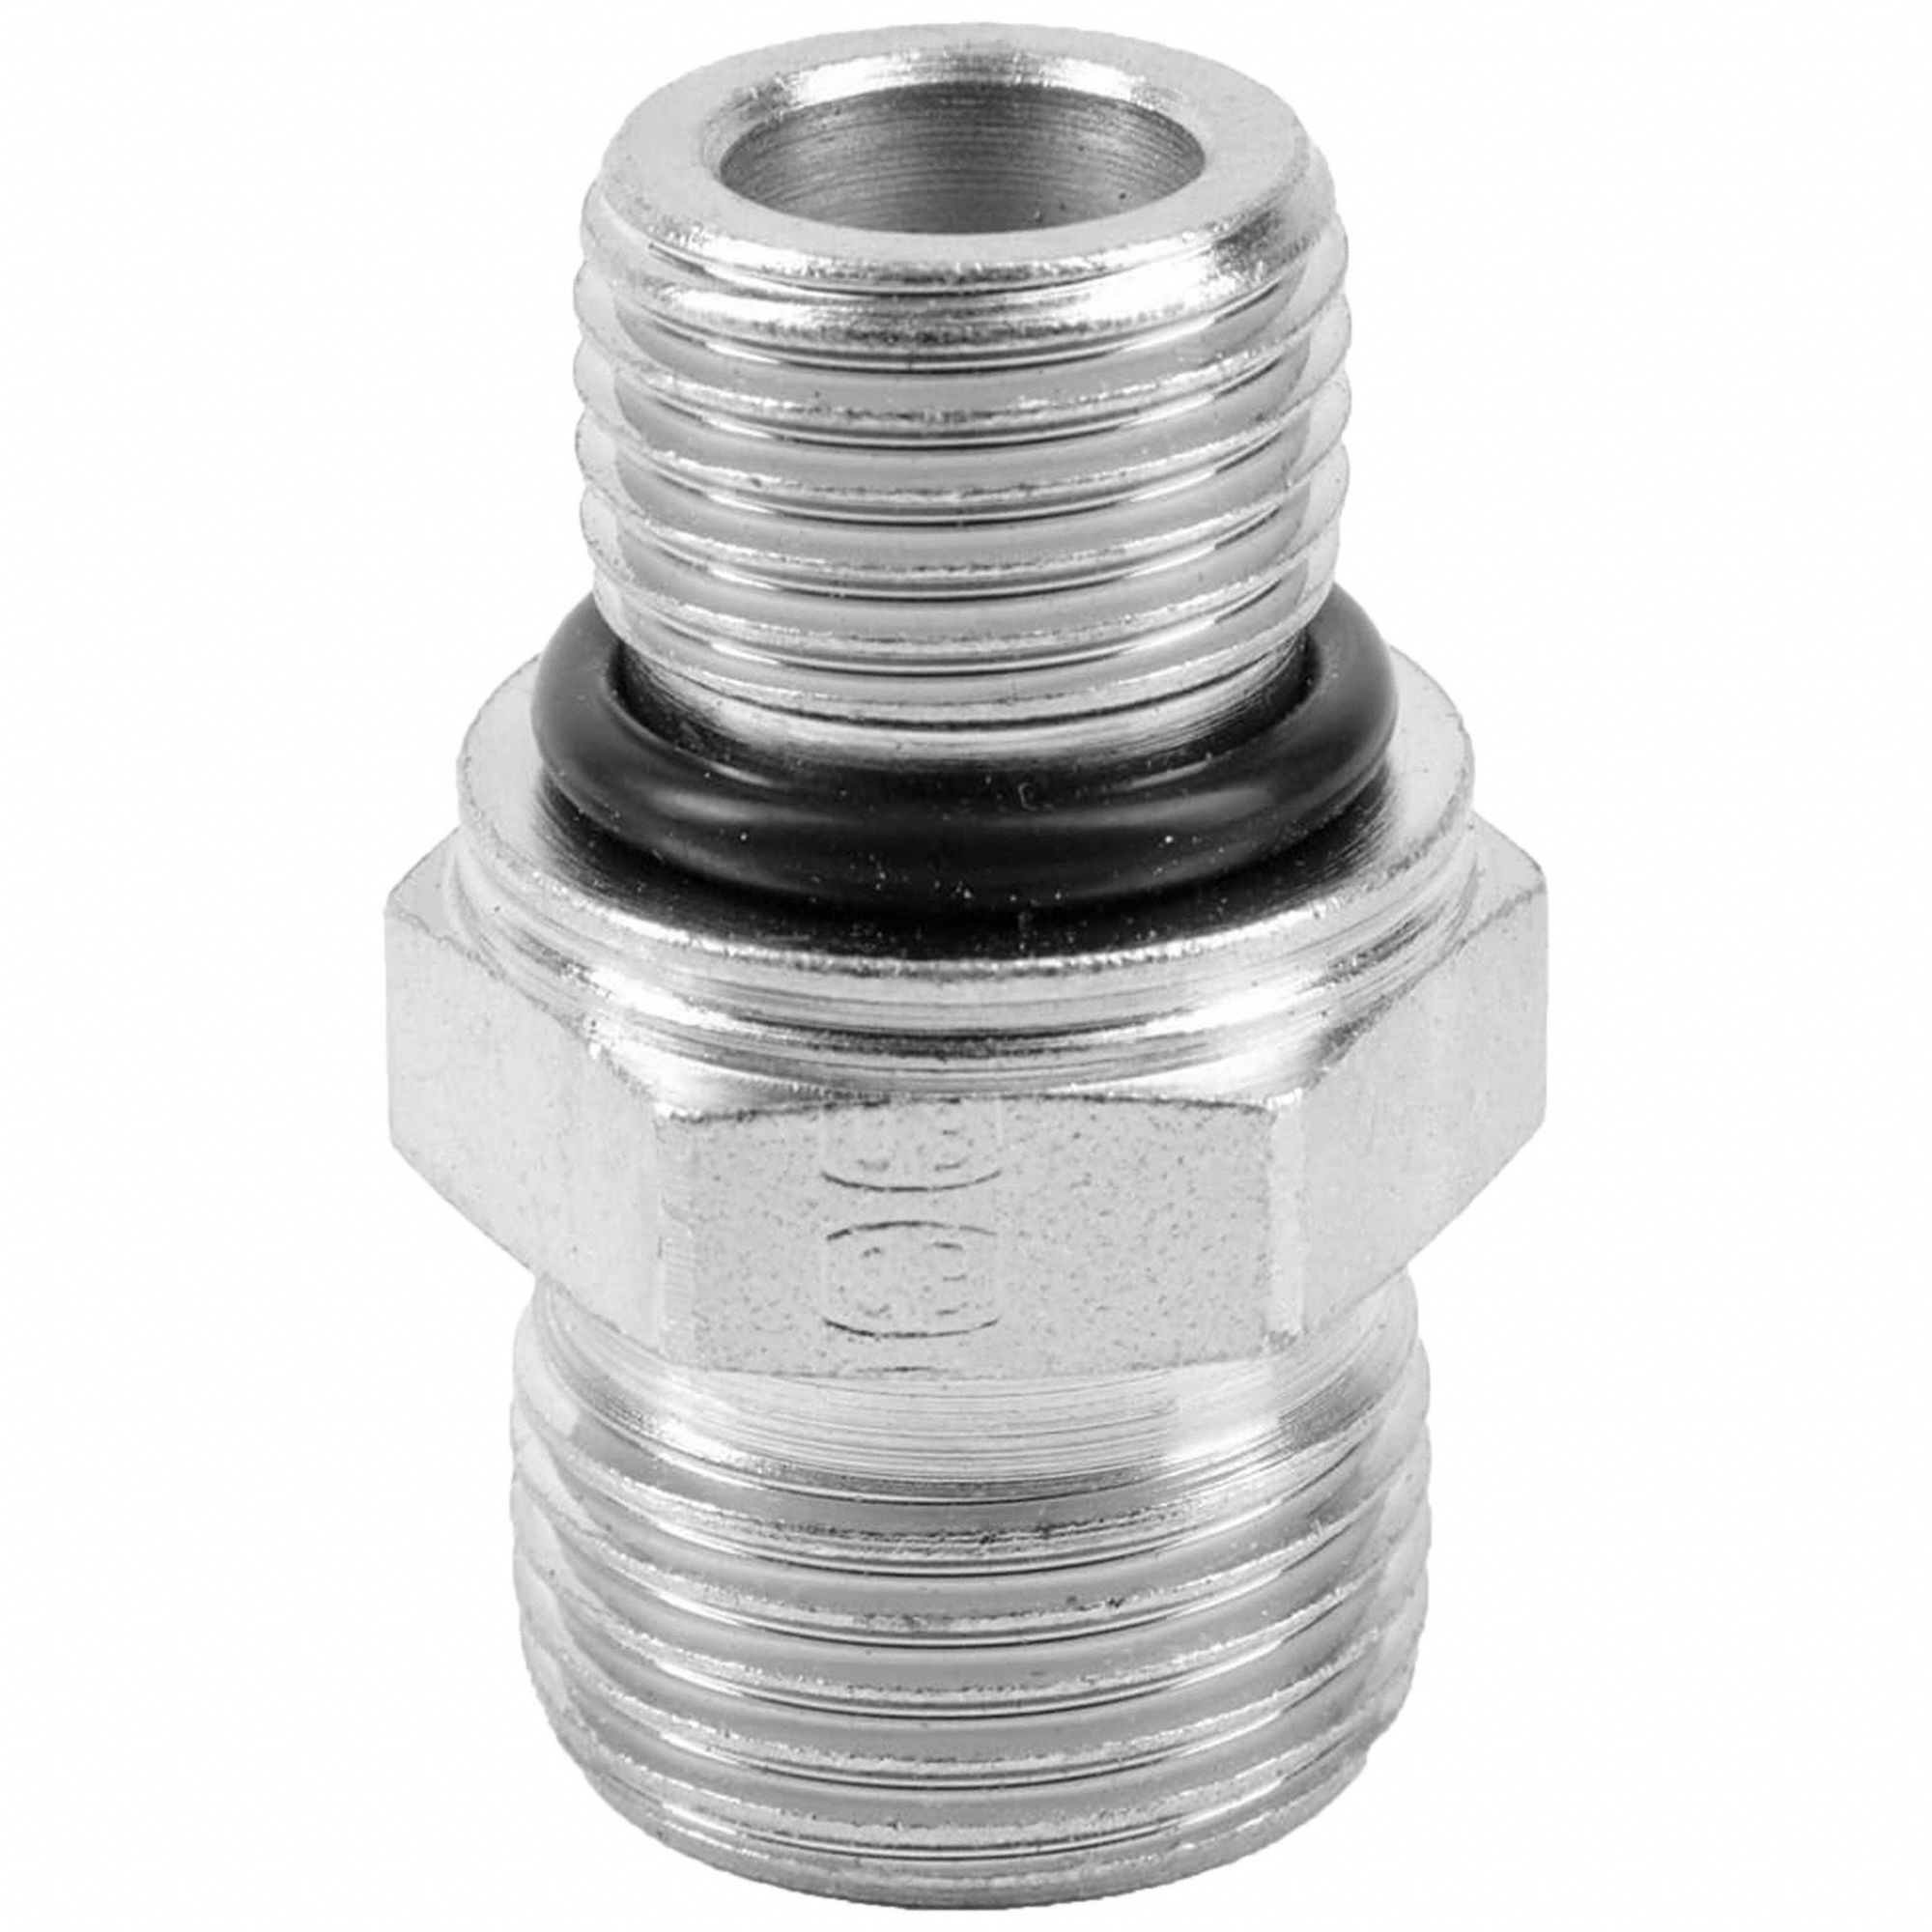 Steel tube fitting: Straight Adapter, Metric x Compression, For 10 mm Tube OD, 7,251 psi, Steel